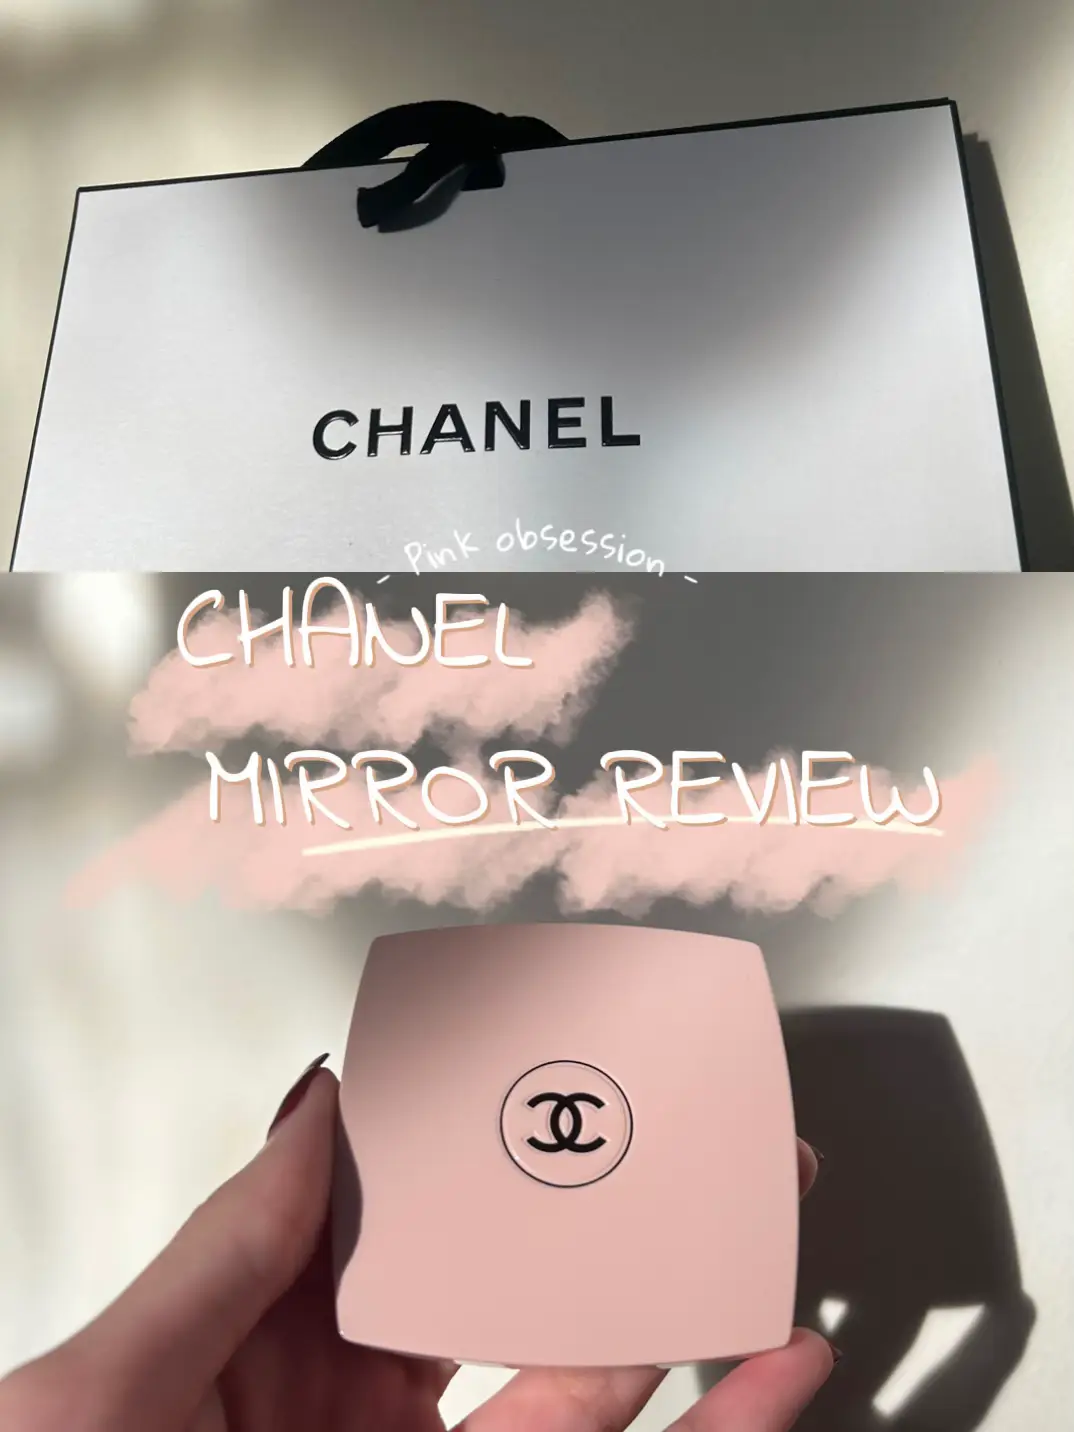 CHANEL 🌸MIRROR REVIEW🌸, Gallery posted by Salomé Alvarado